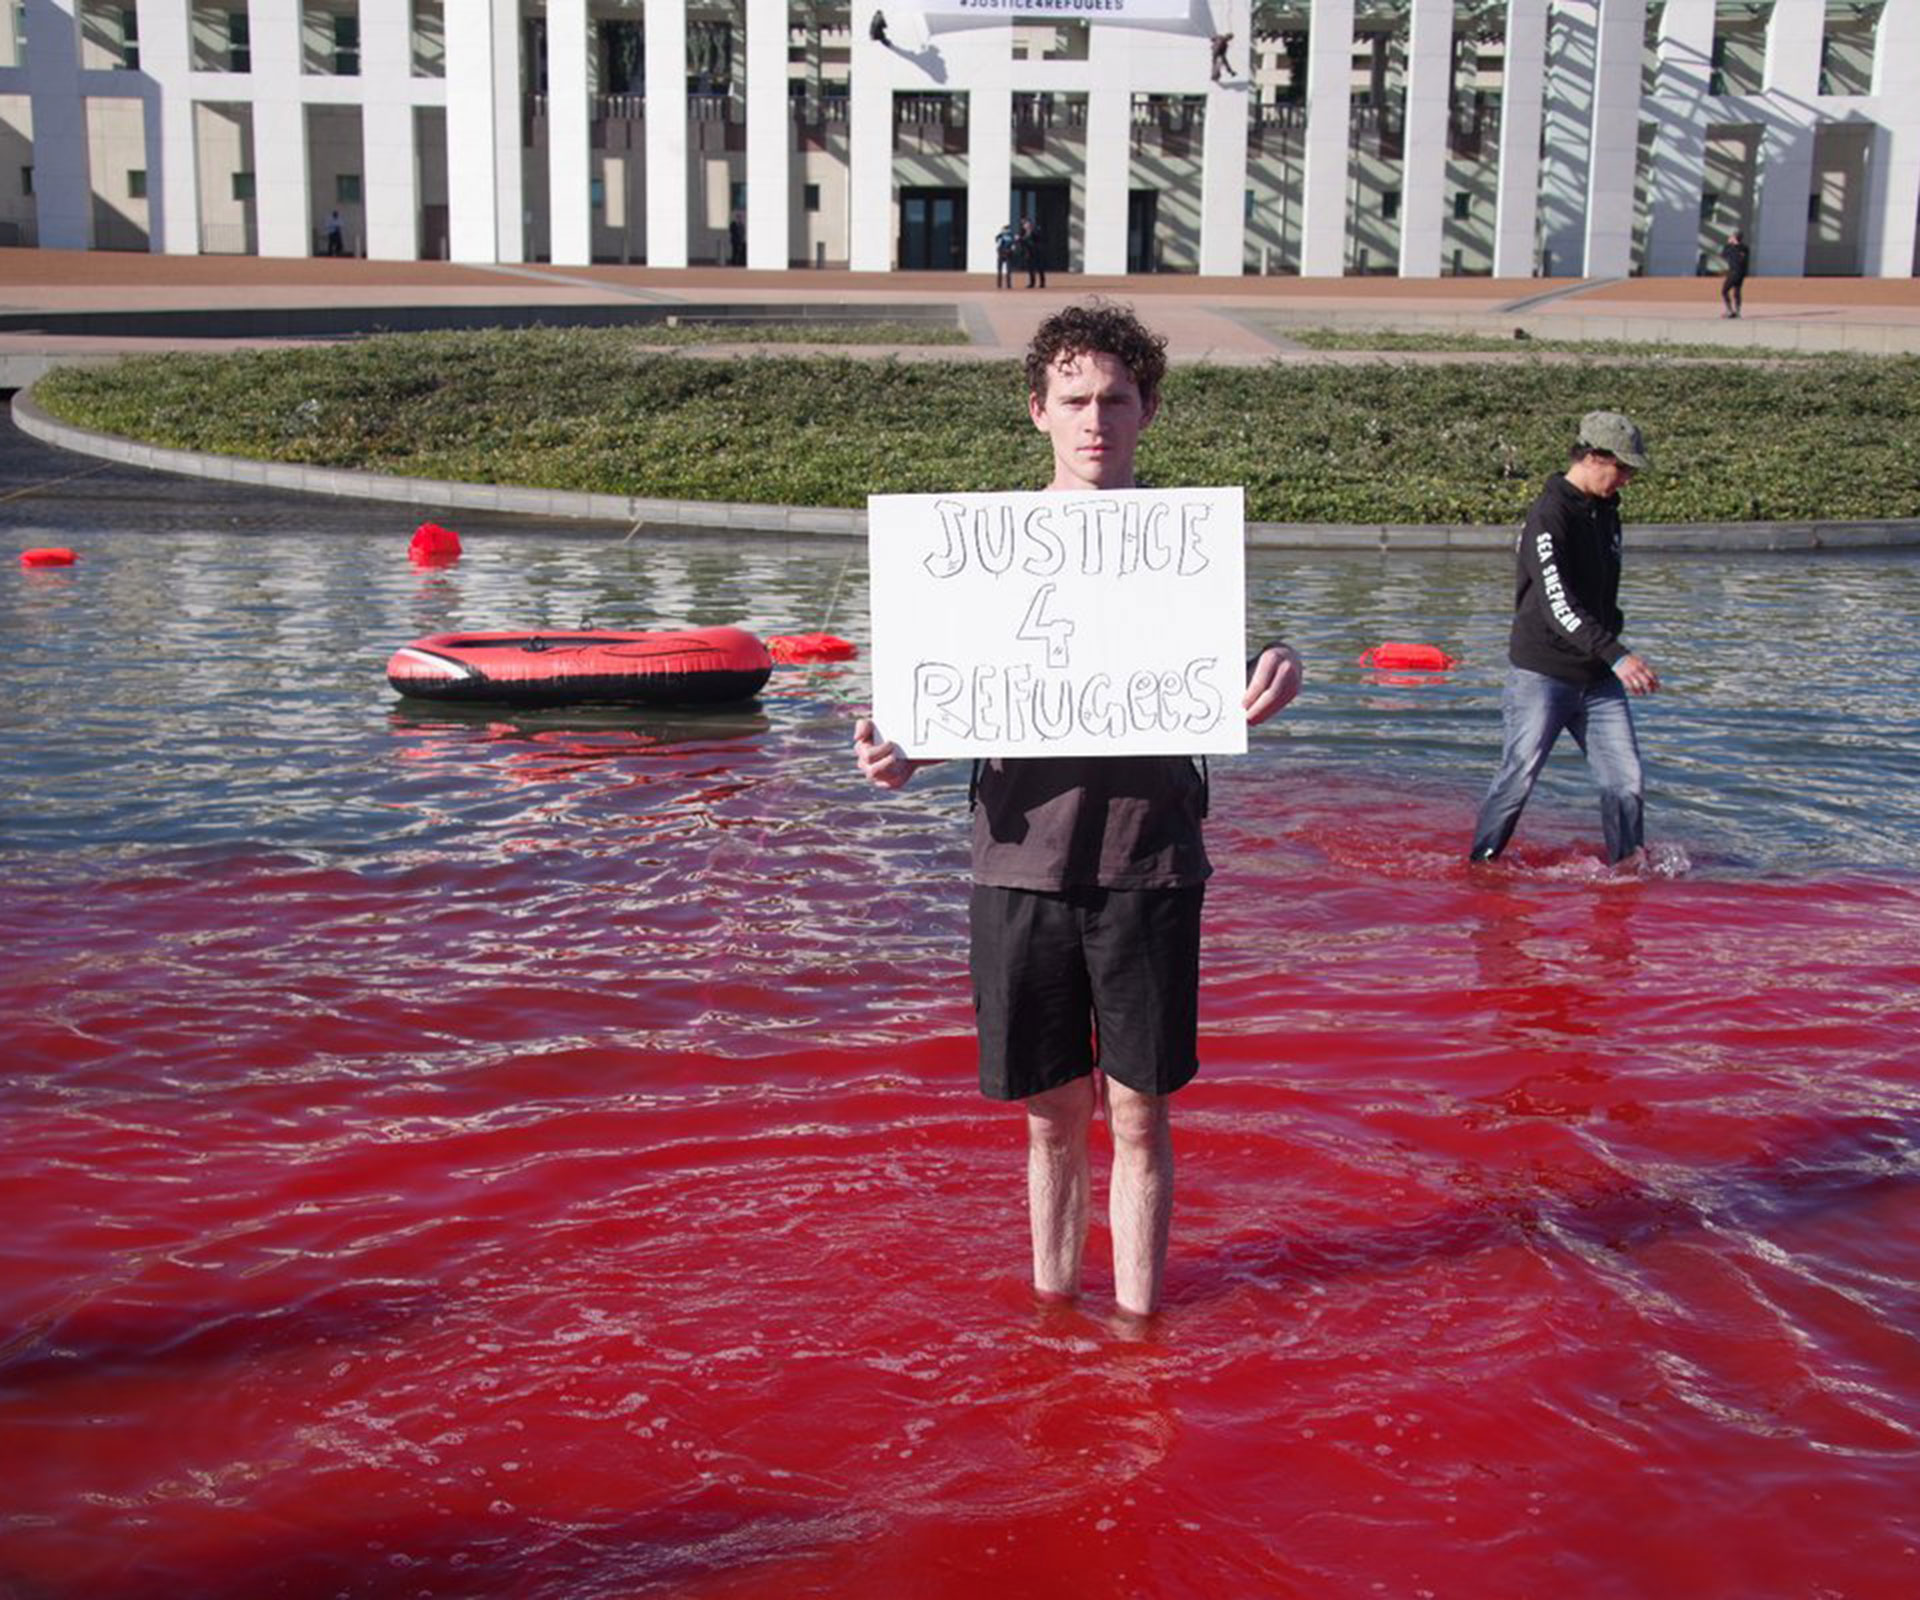 Pro-refugee campaigners abseiled down Parliament House and dyed the pond blood red in protest